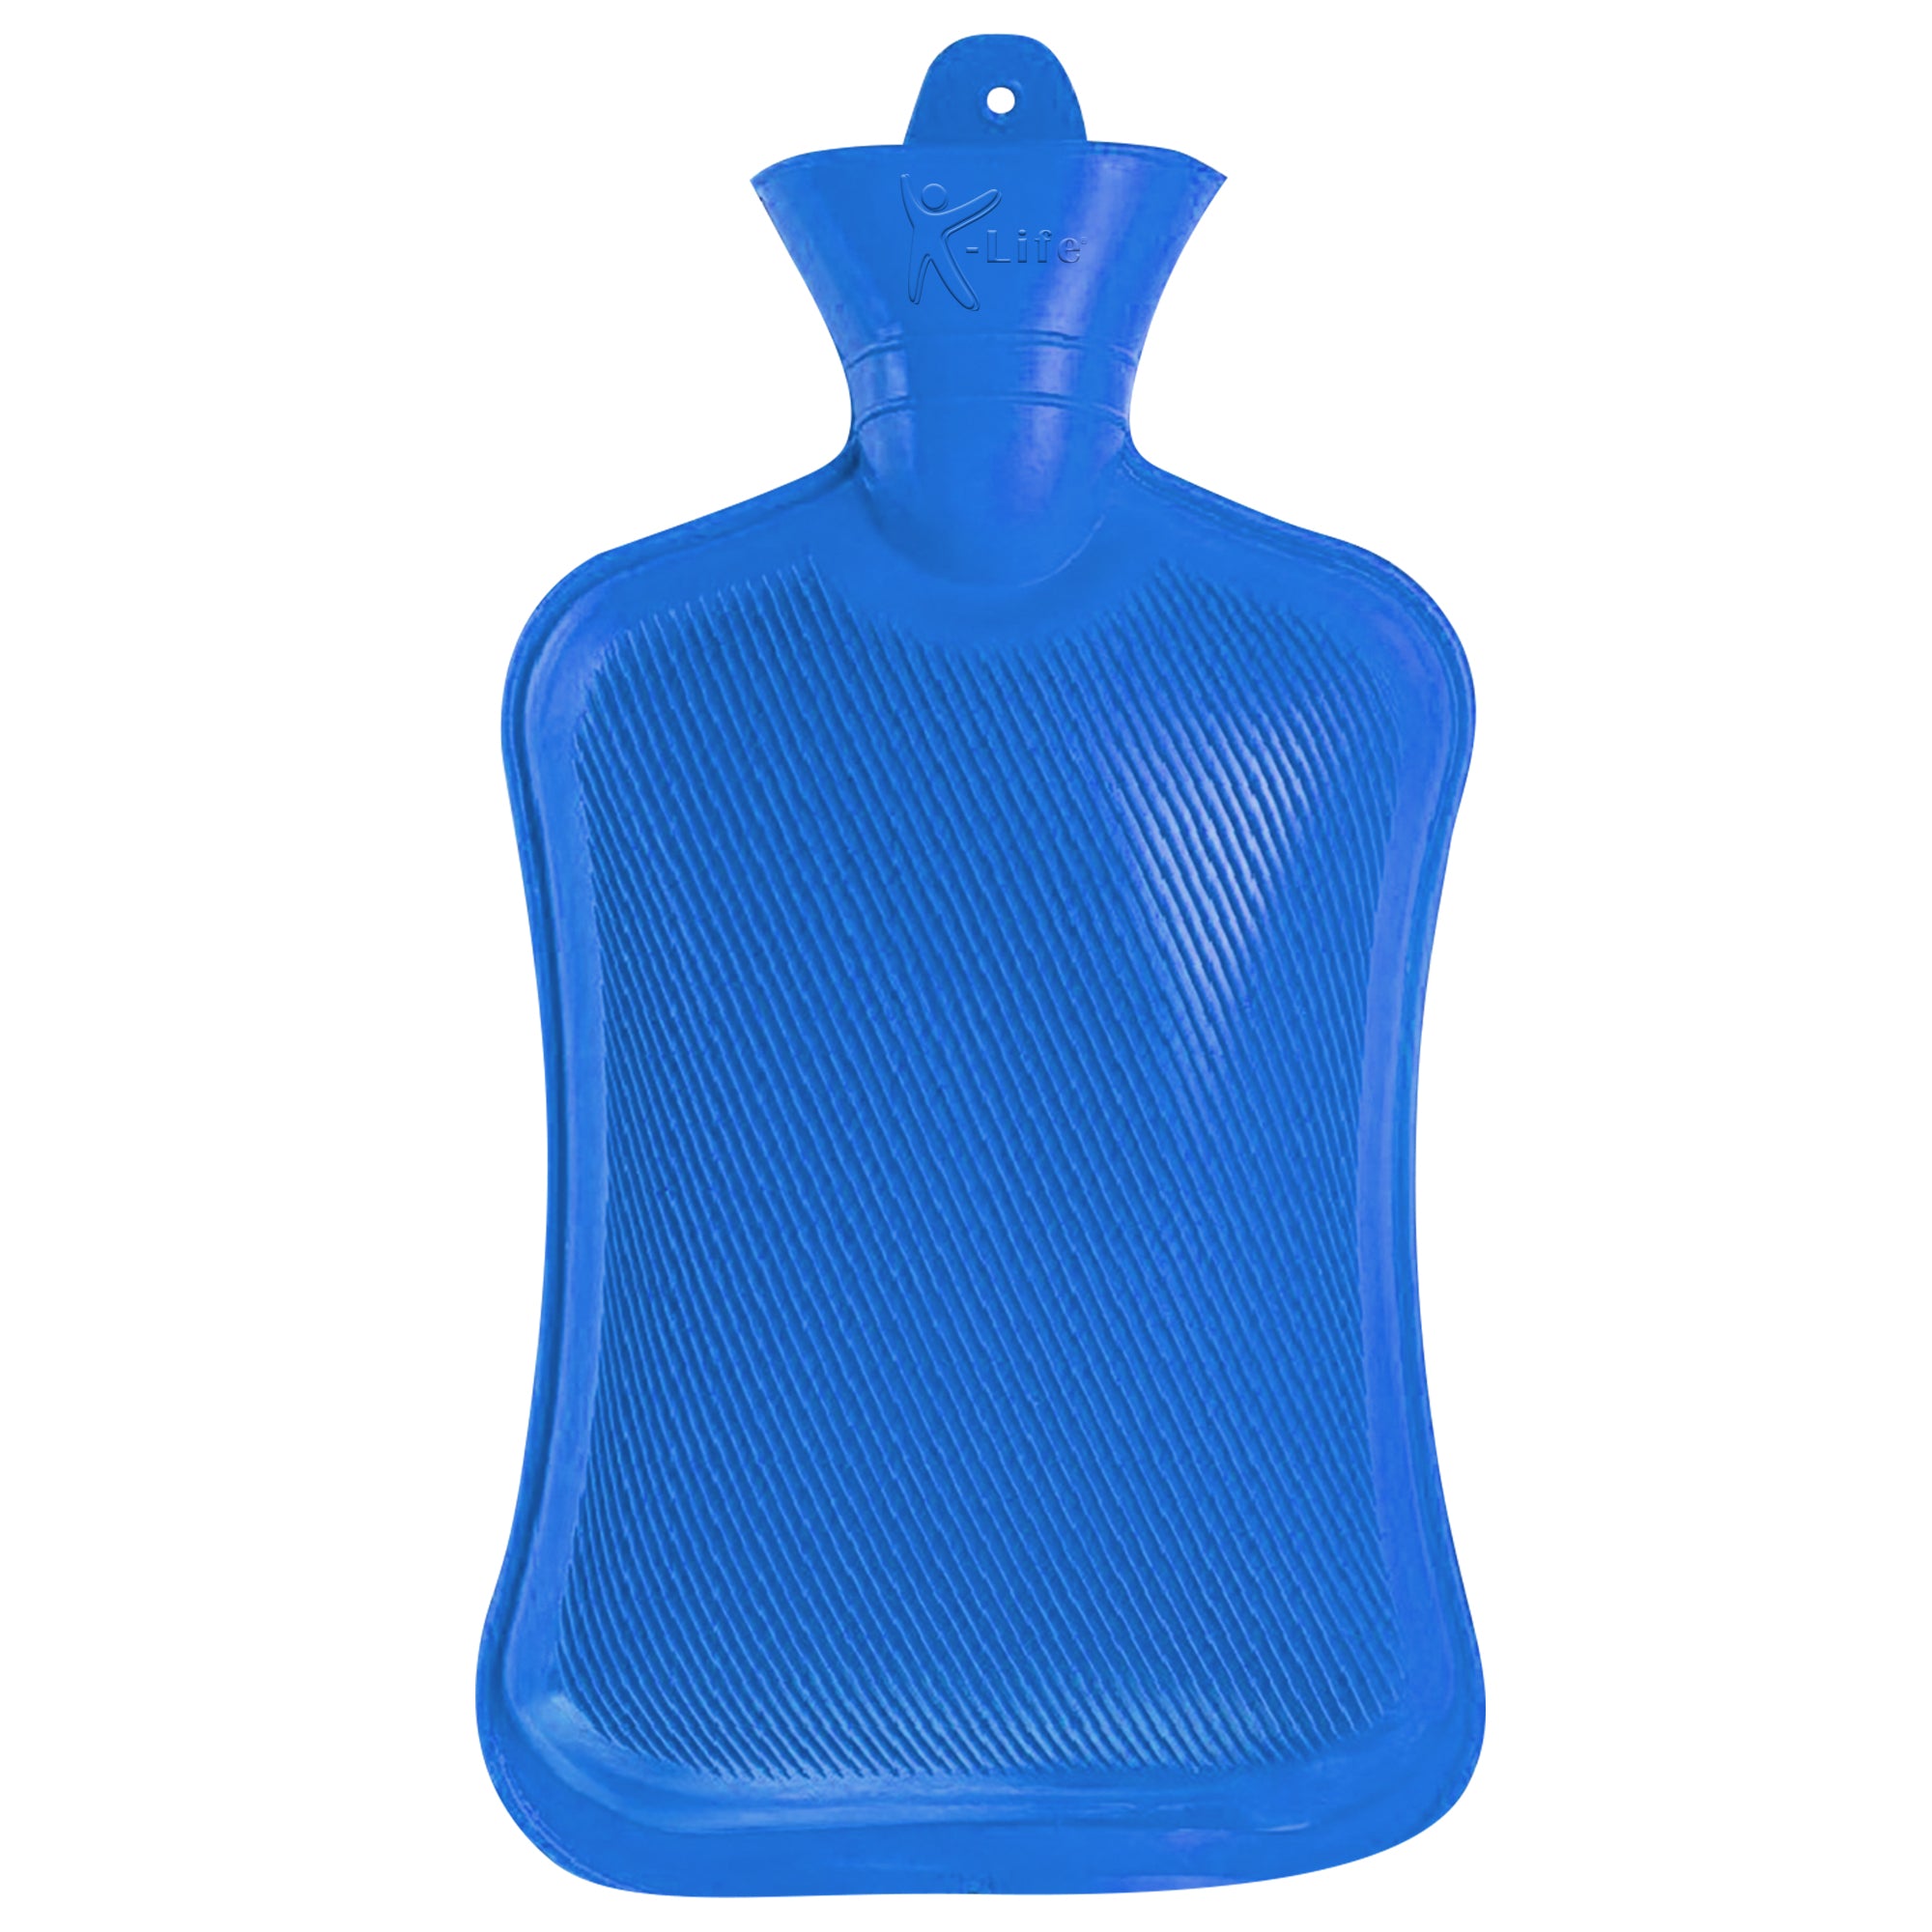 K-life Thick Rubber Non-electrical Hot Water Bag (Blue)